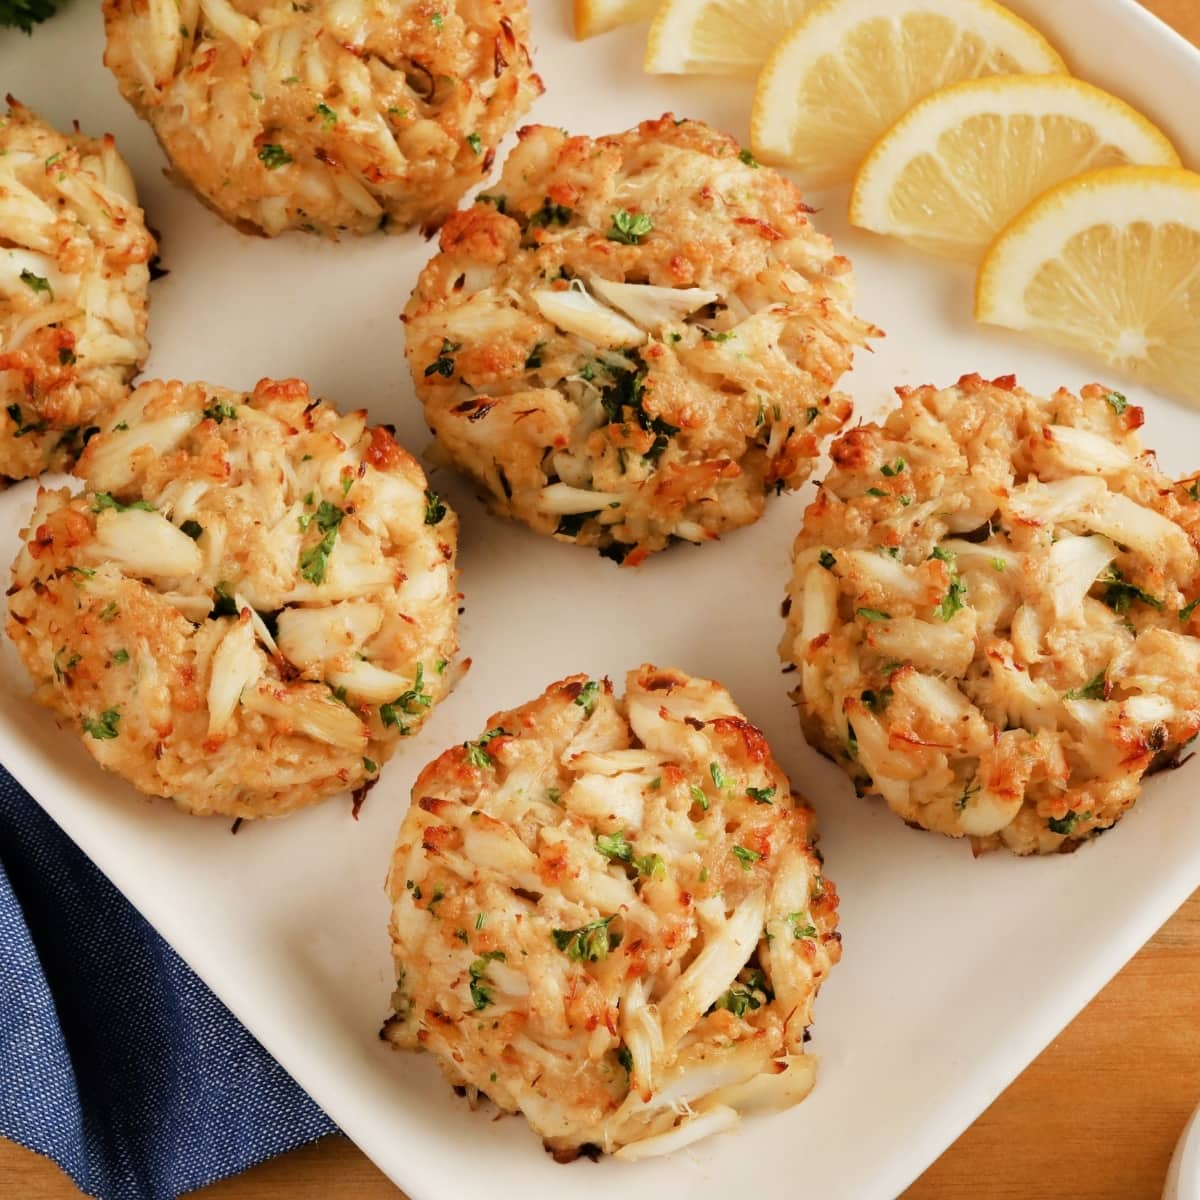 Aggregate more than 50 order crab cakes